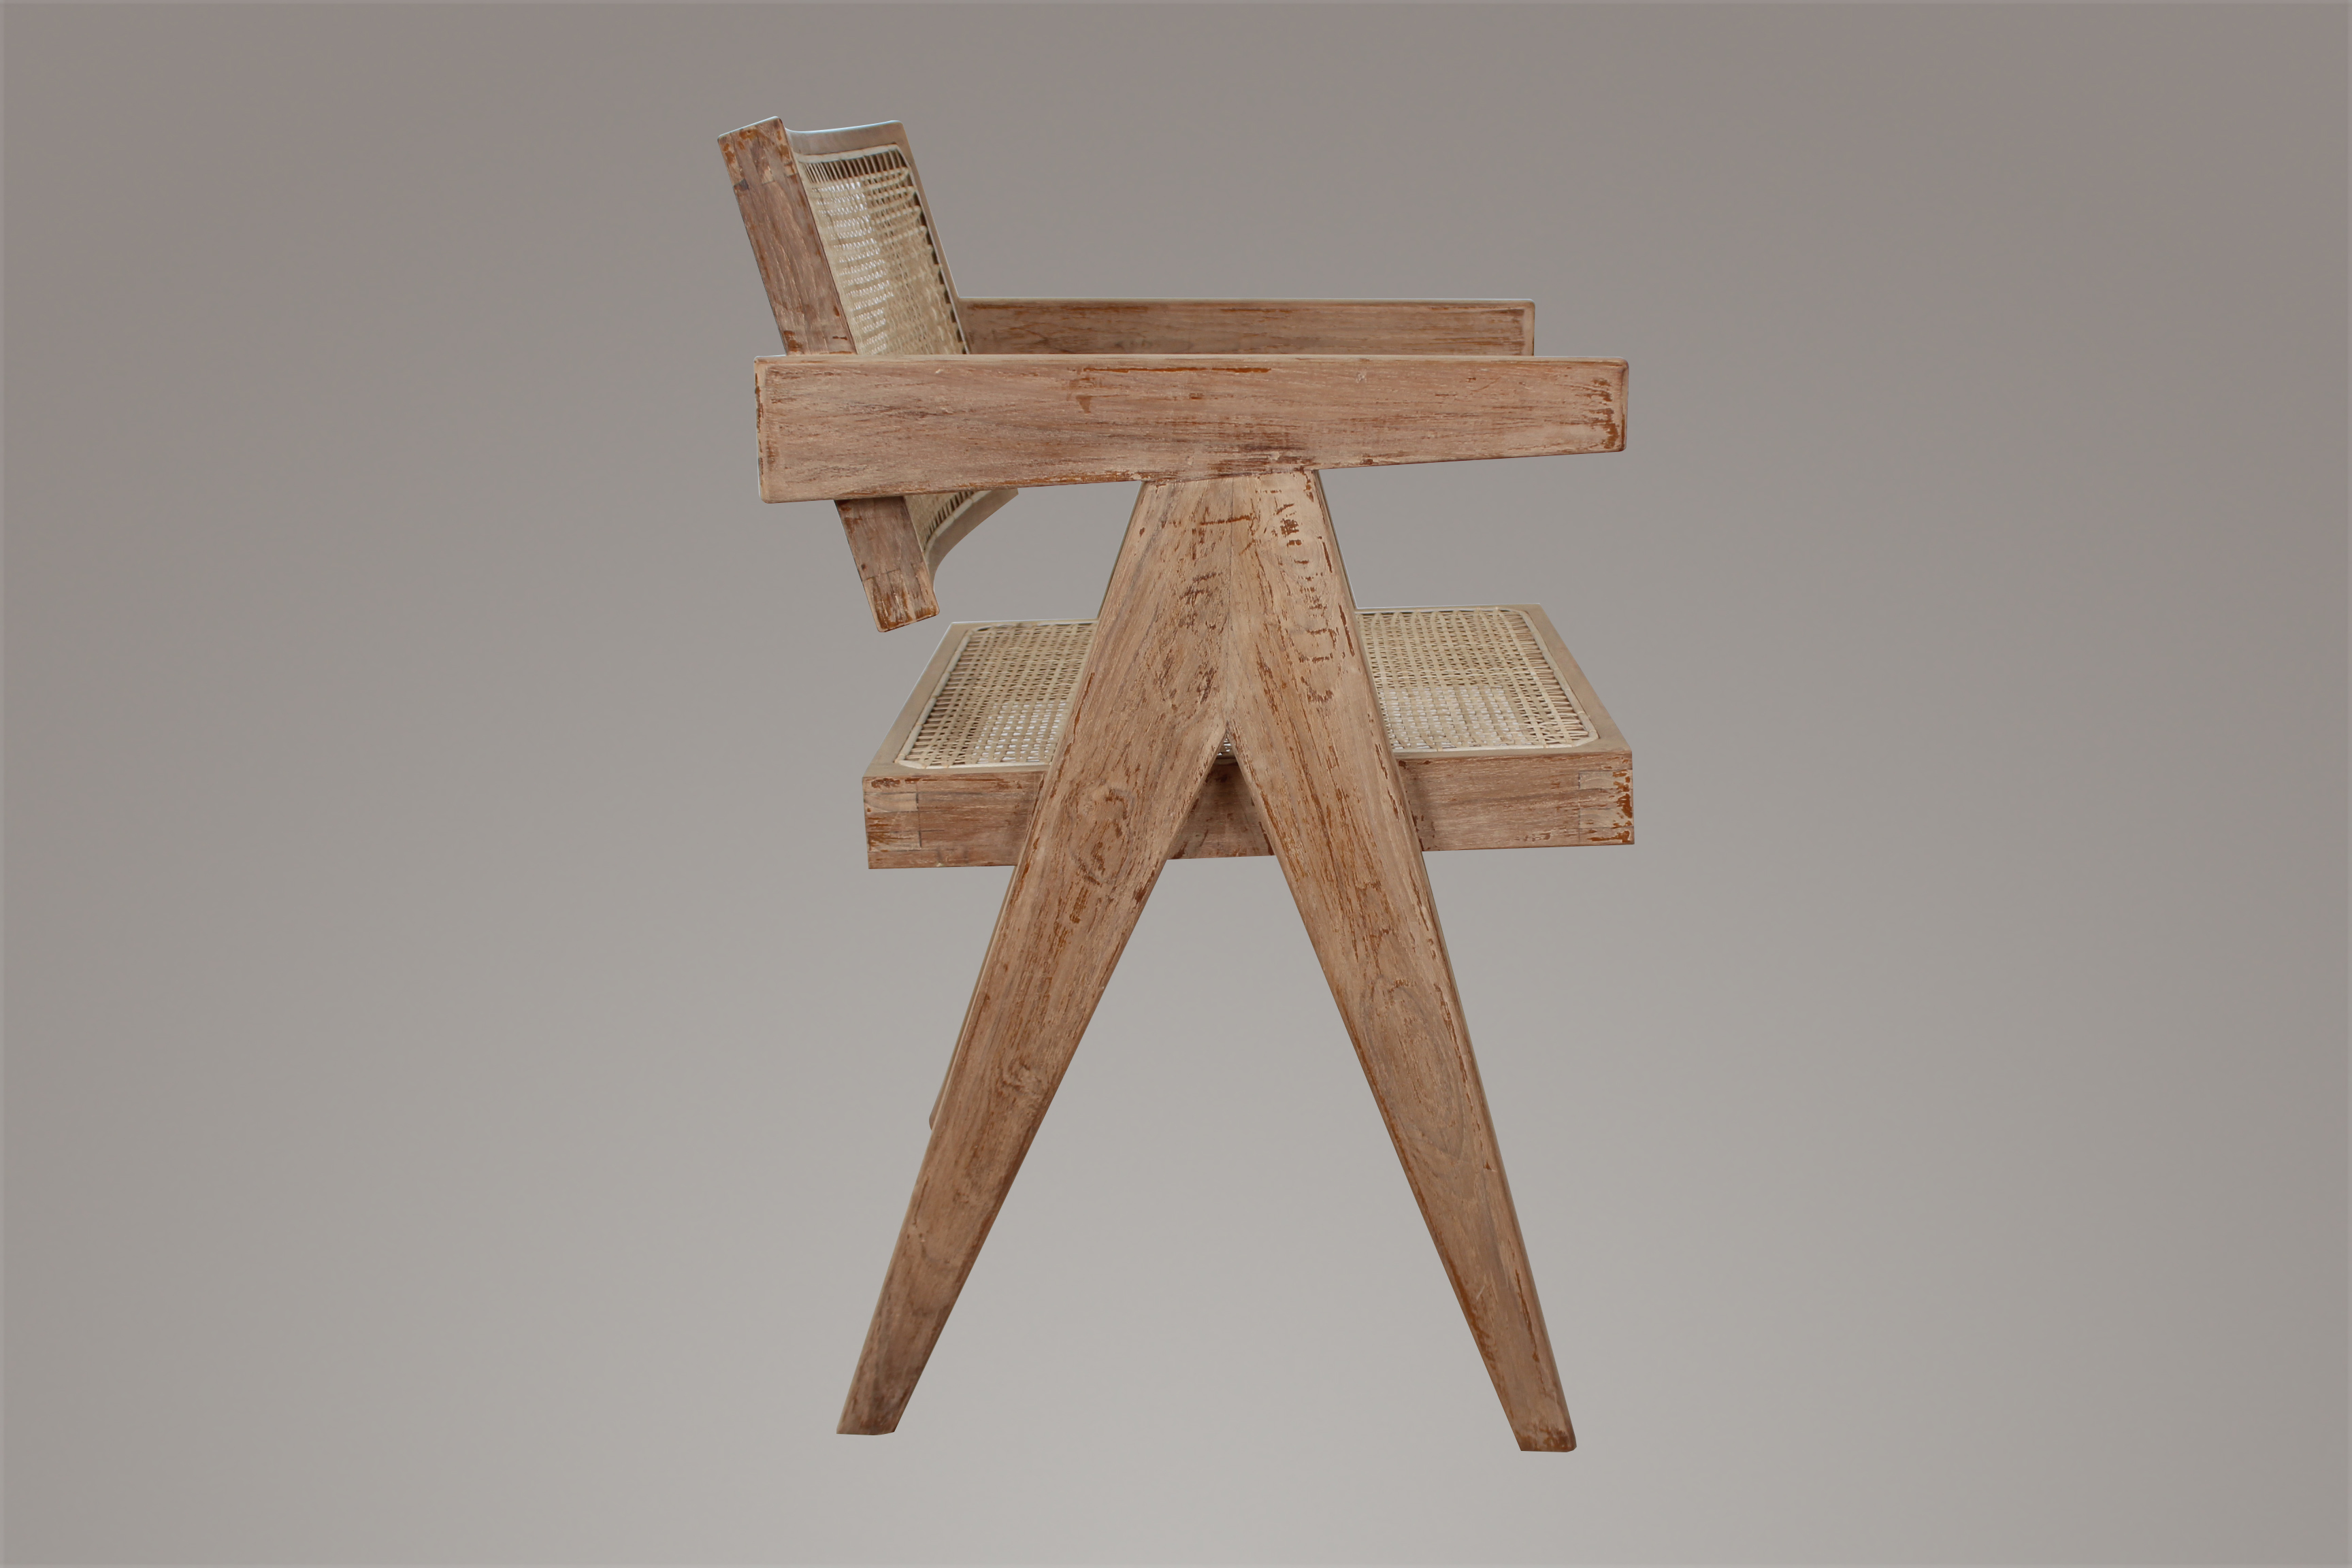 Pierre Jeanneret Dining Room Chair in Weather Beaten Finish